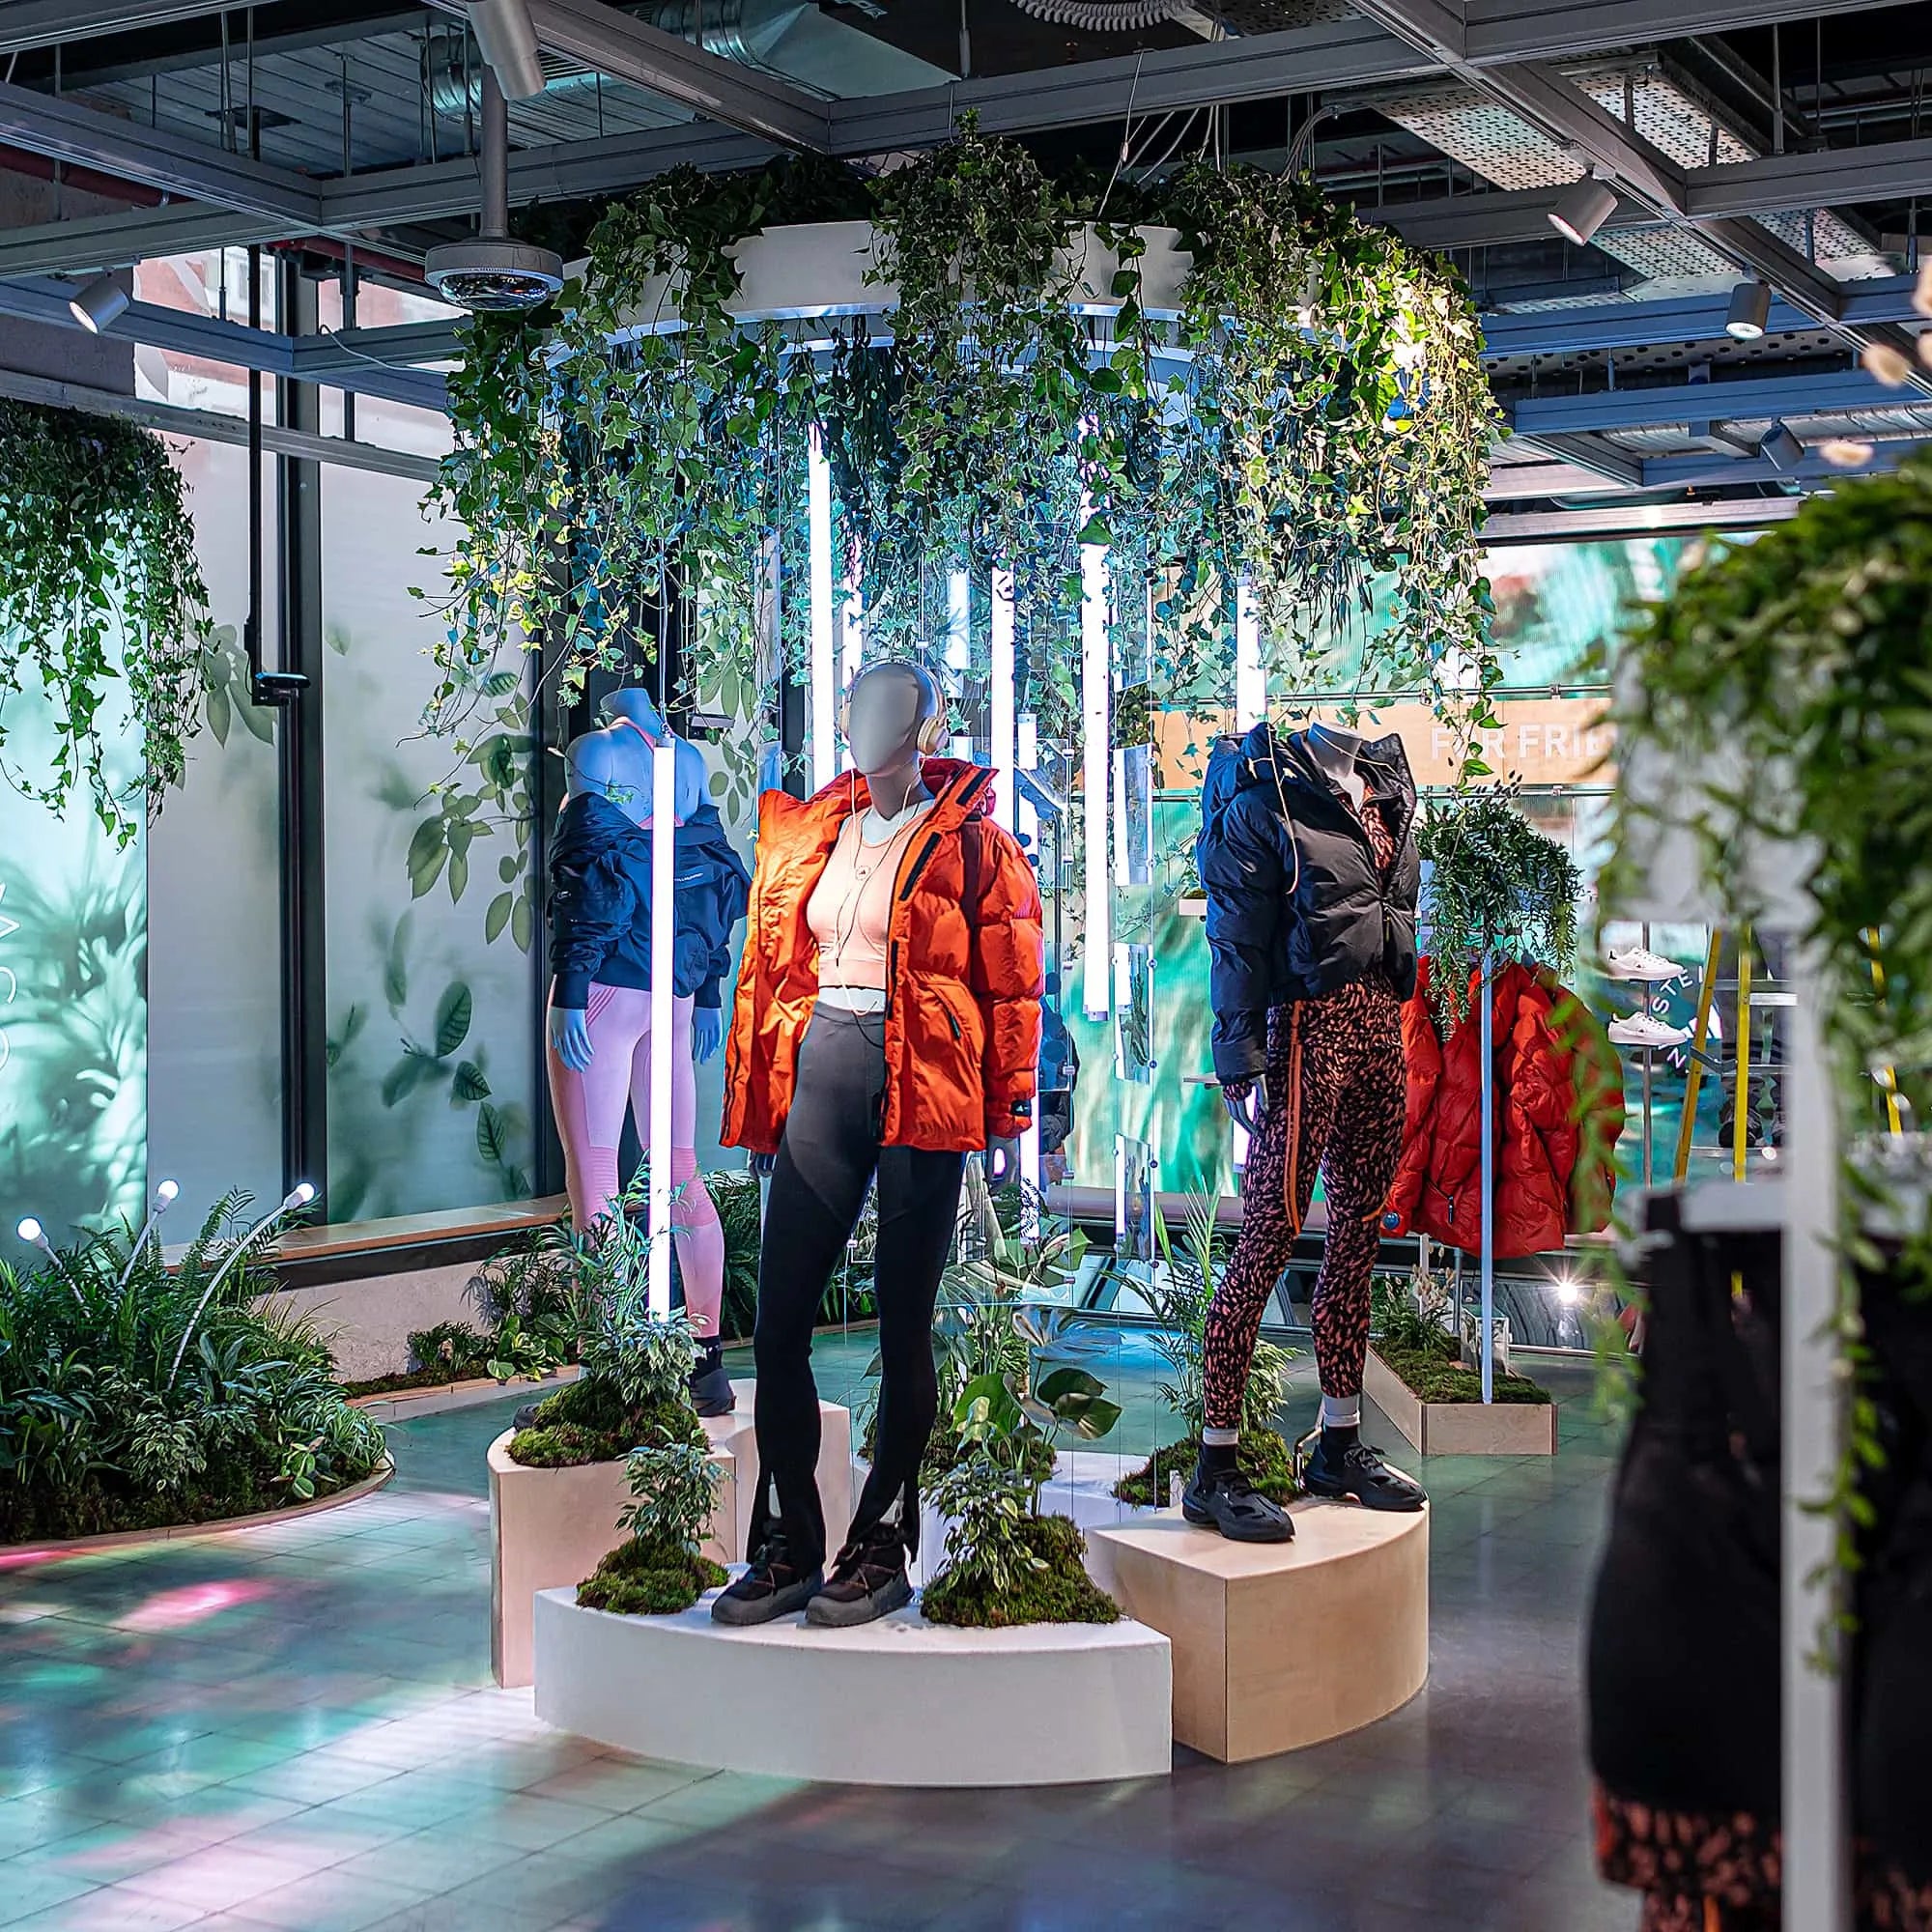 Mannequins dressed in Adidas x Stella McCartney aSMC collection are arrayed on pedestals amidst a lavish display of greenery by Amaranté London Event Florist, offers a harmonious blend of bold sportswear and delicate foliage, emblematic of sustainable luxury fashion.